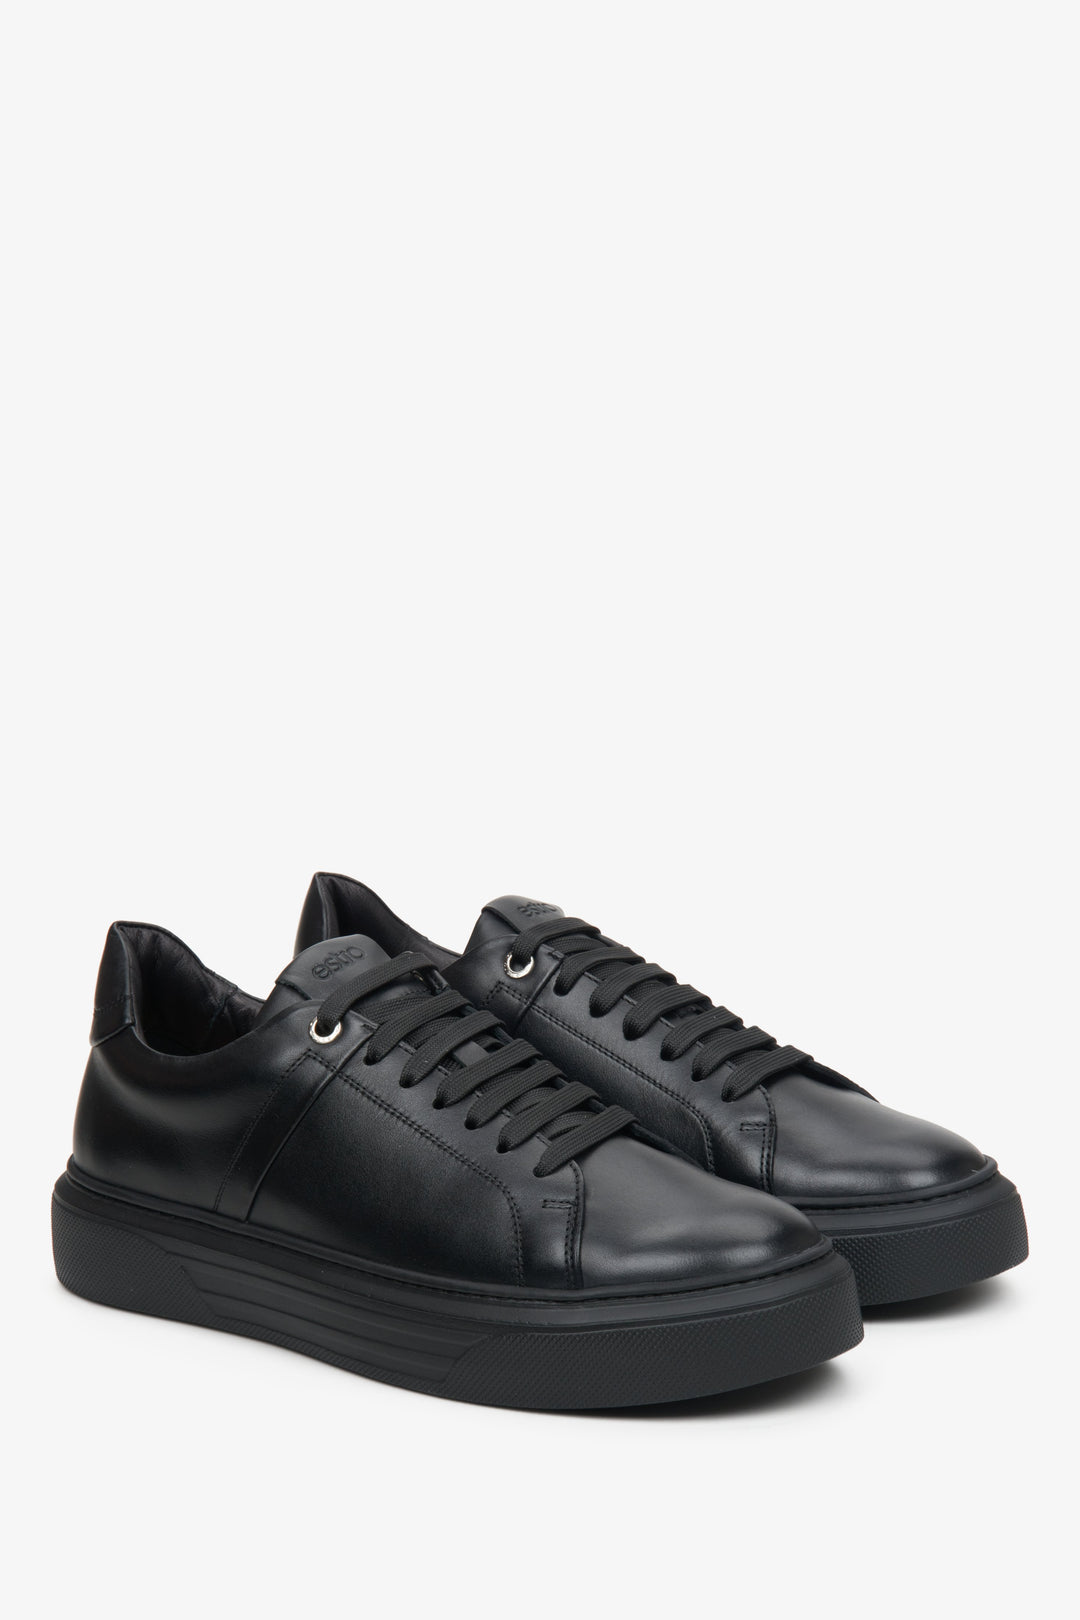 Leather black men's sneakers for autumn.